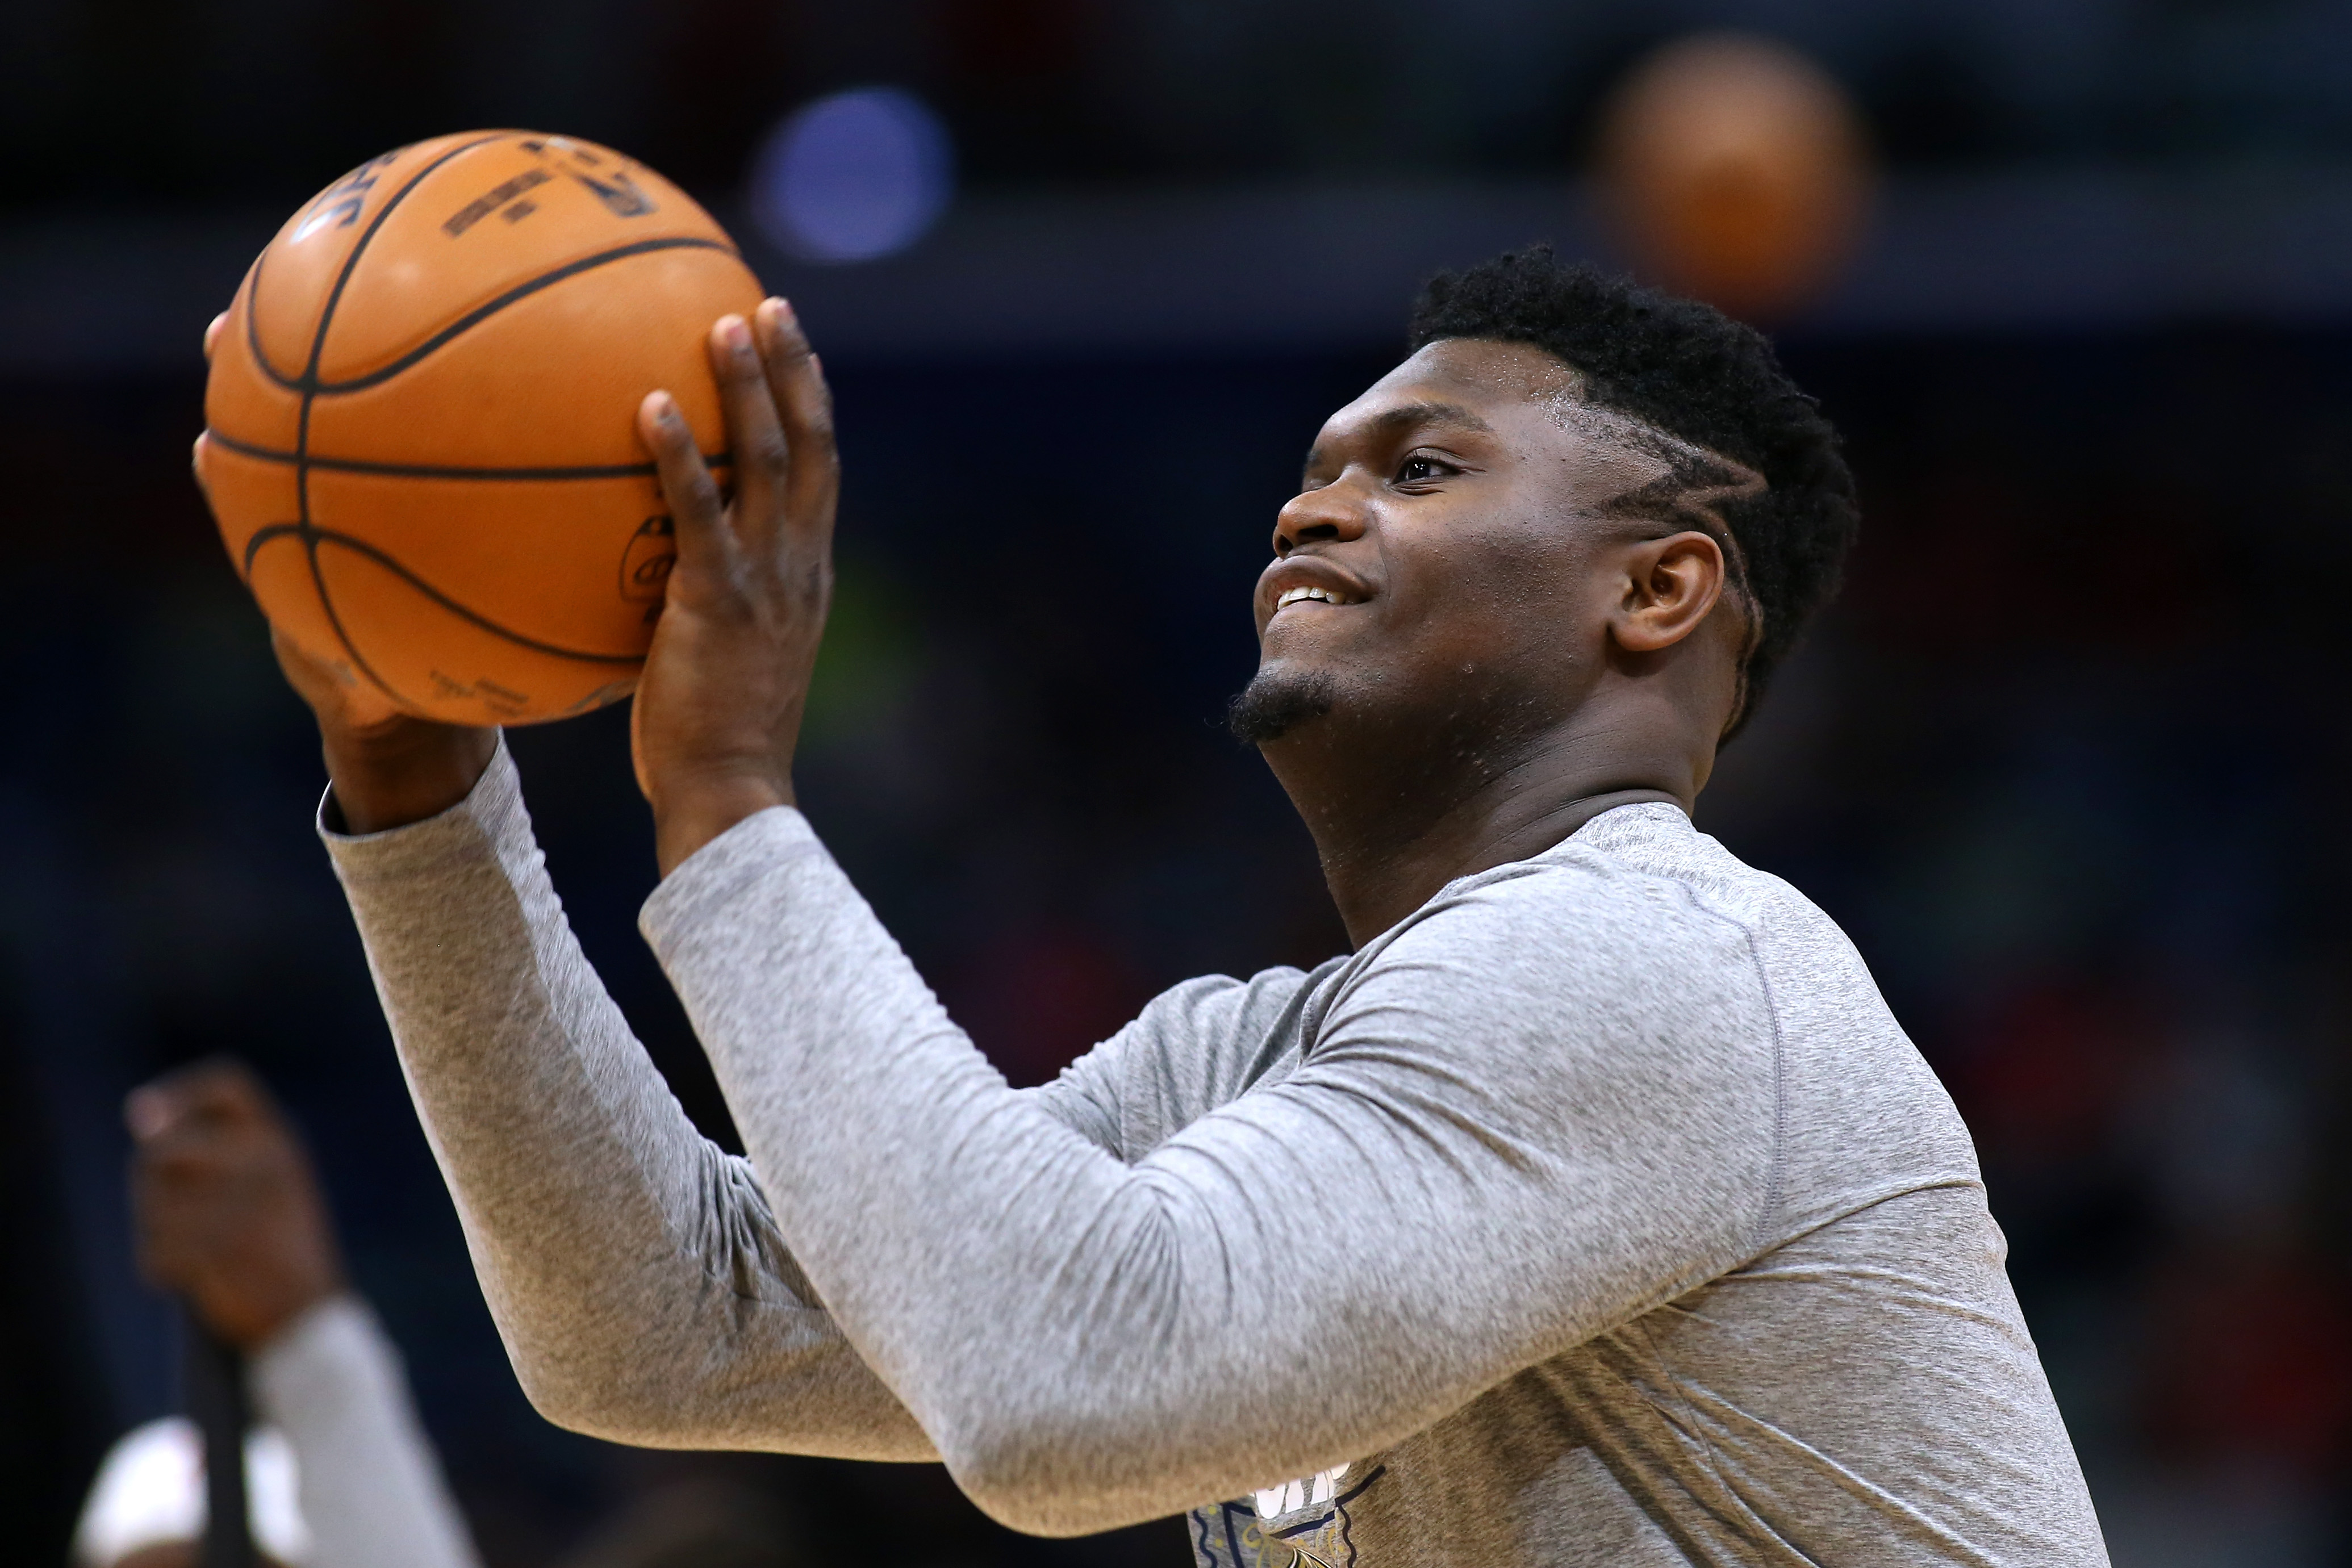 Zion Williamson Added a New Wrinkle to His Game That Should Terrify the Rest of the NBA